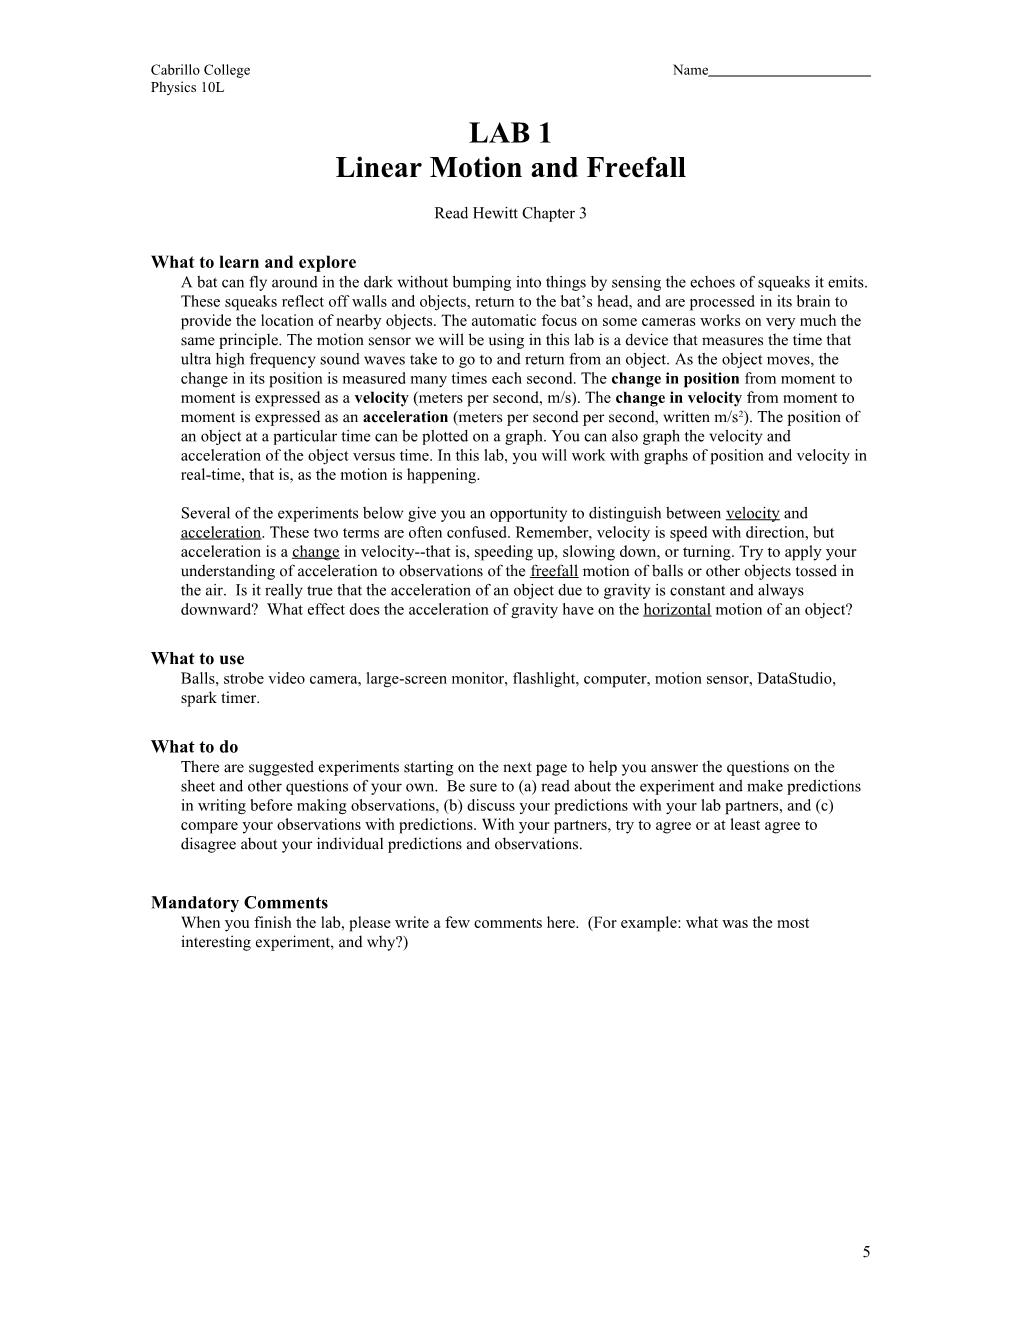 Linear Motion and Freefall